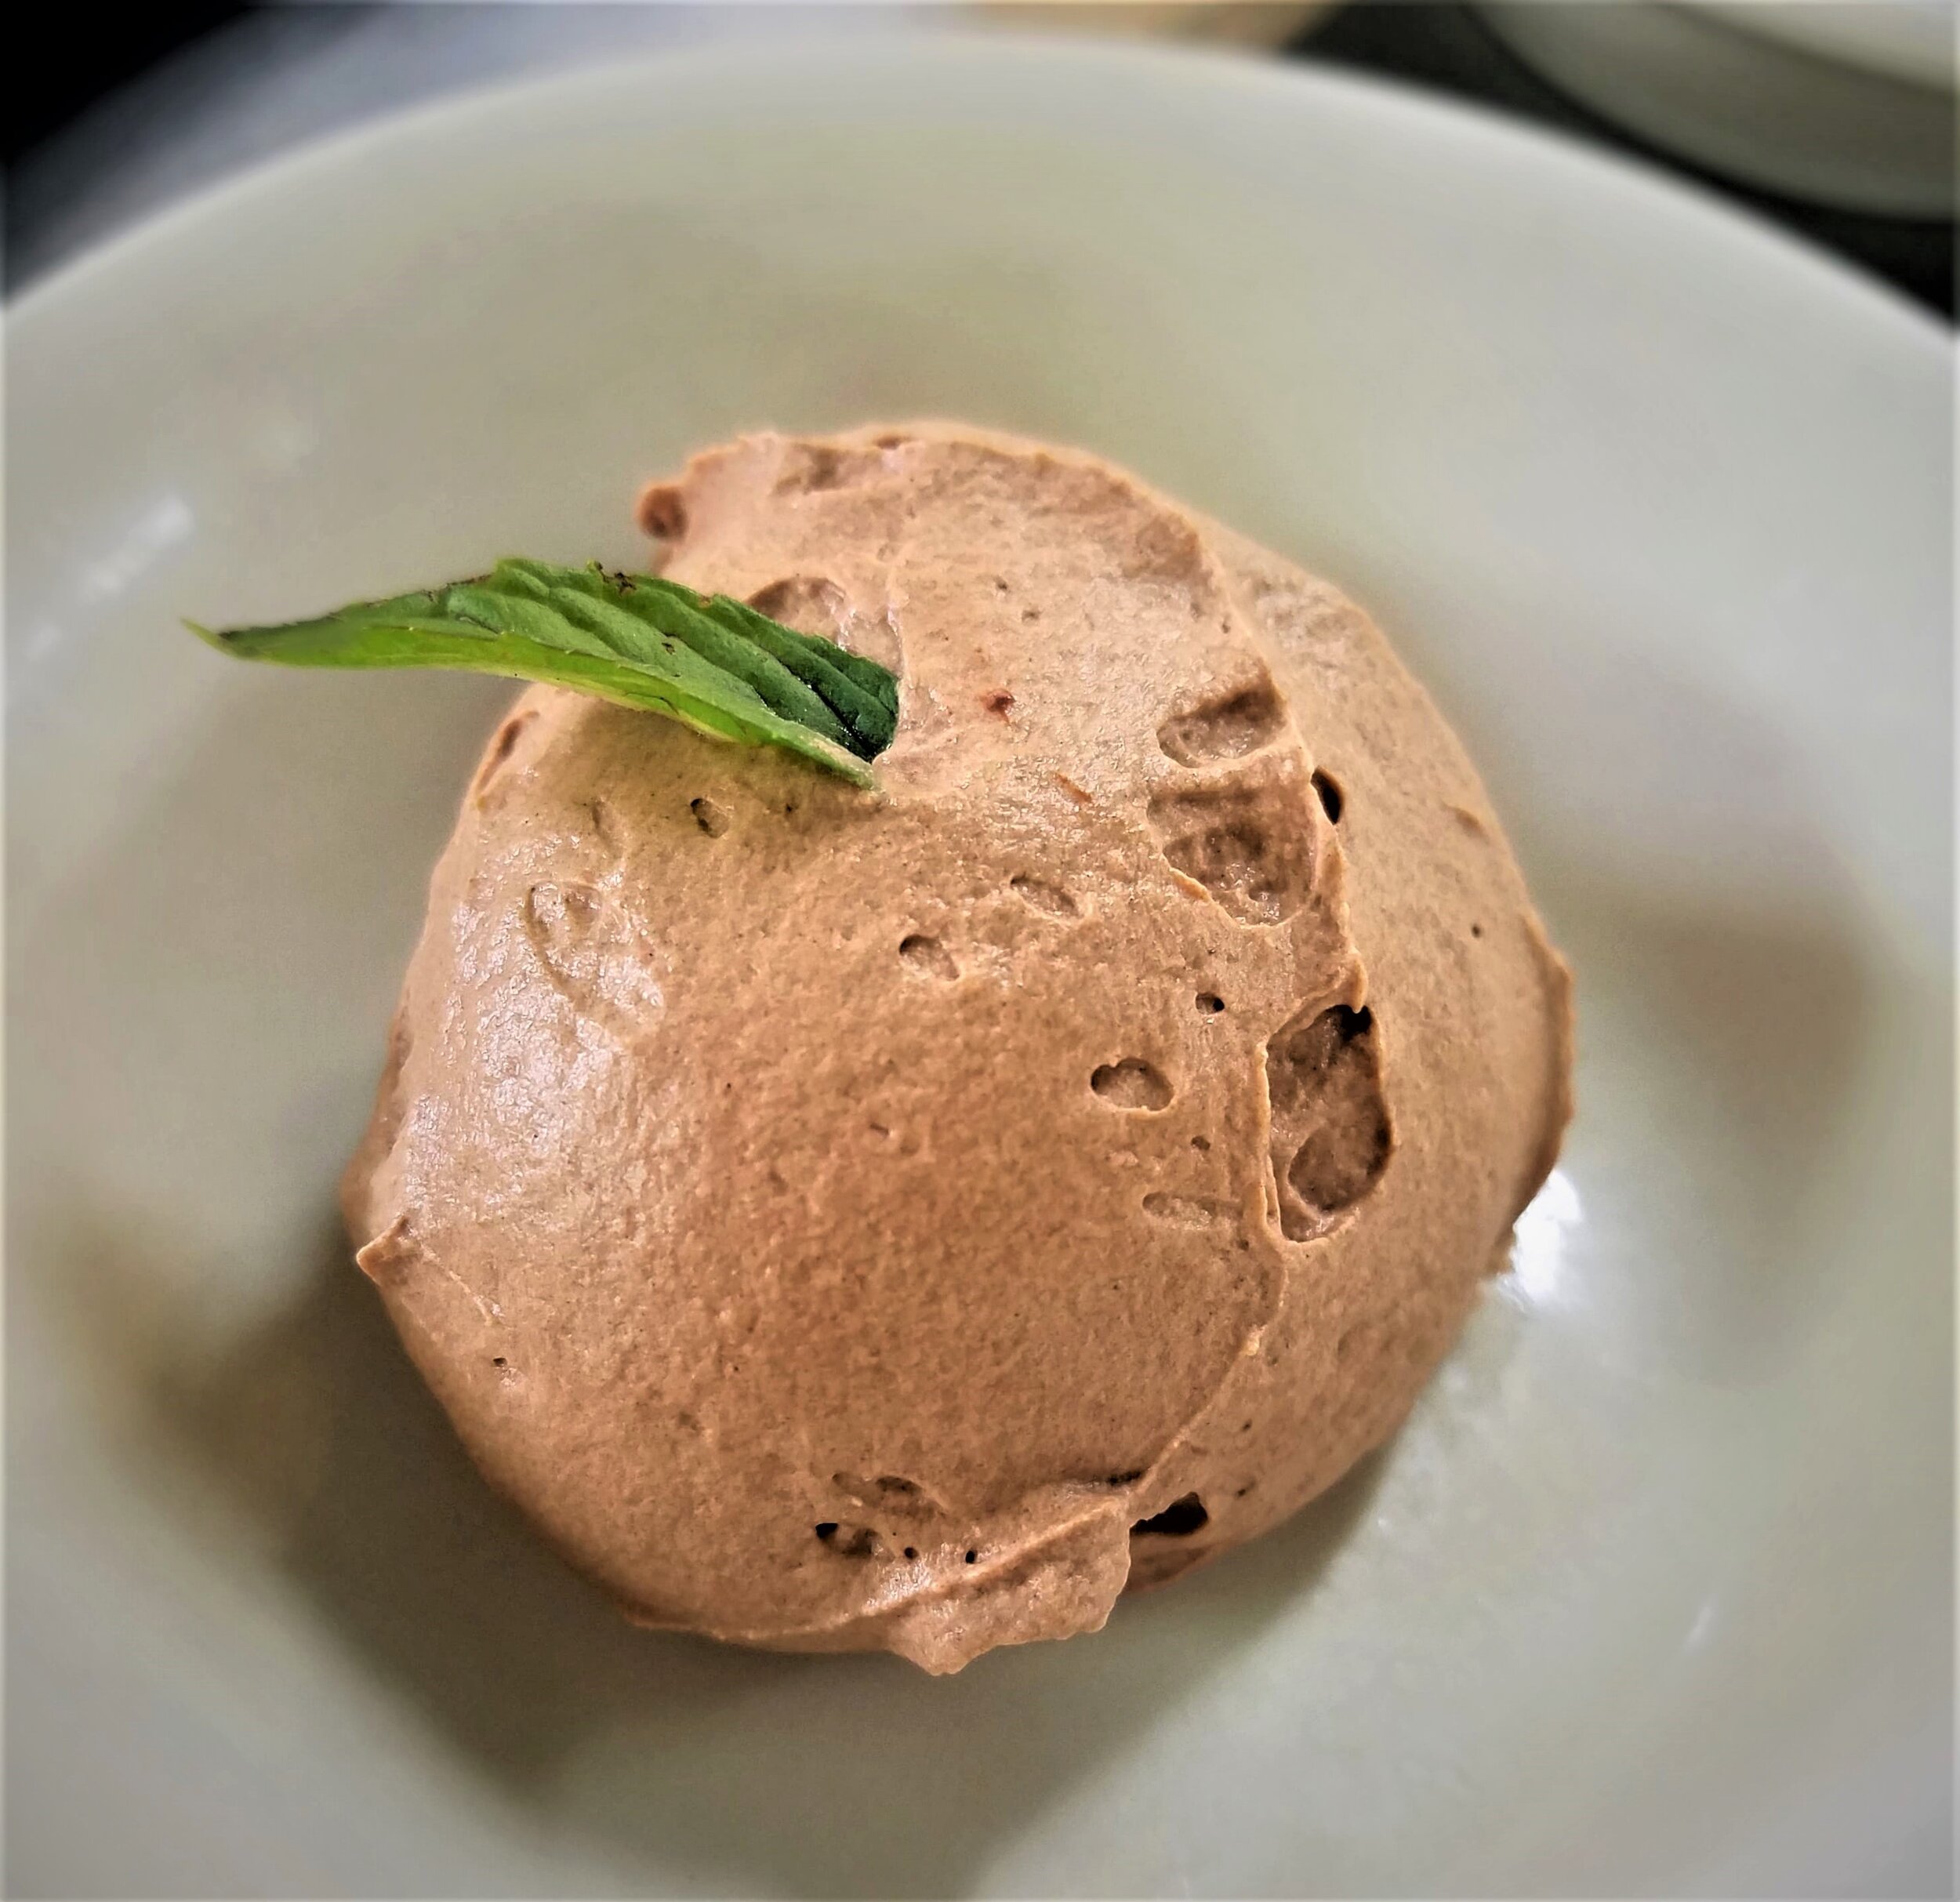 Chocolate Mousse with Mint